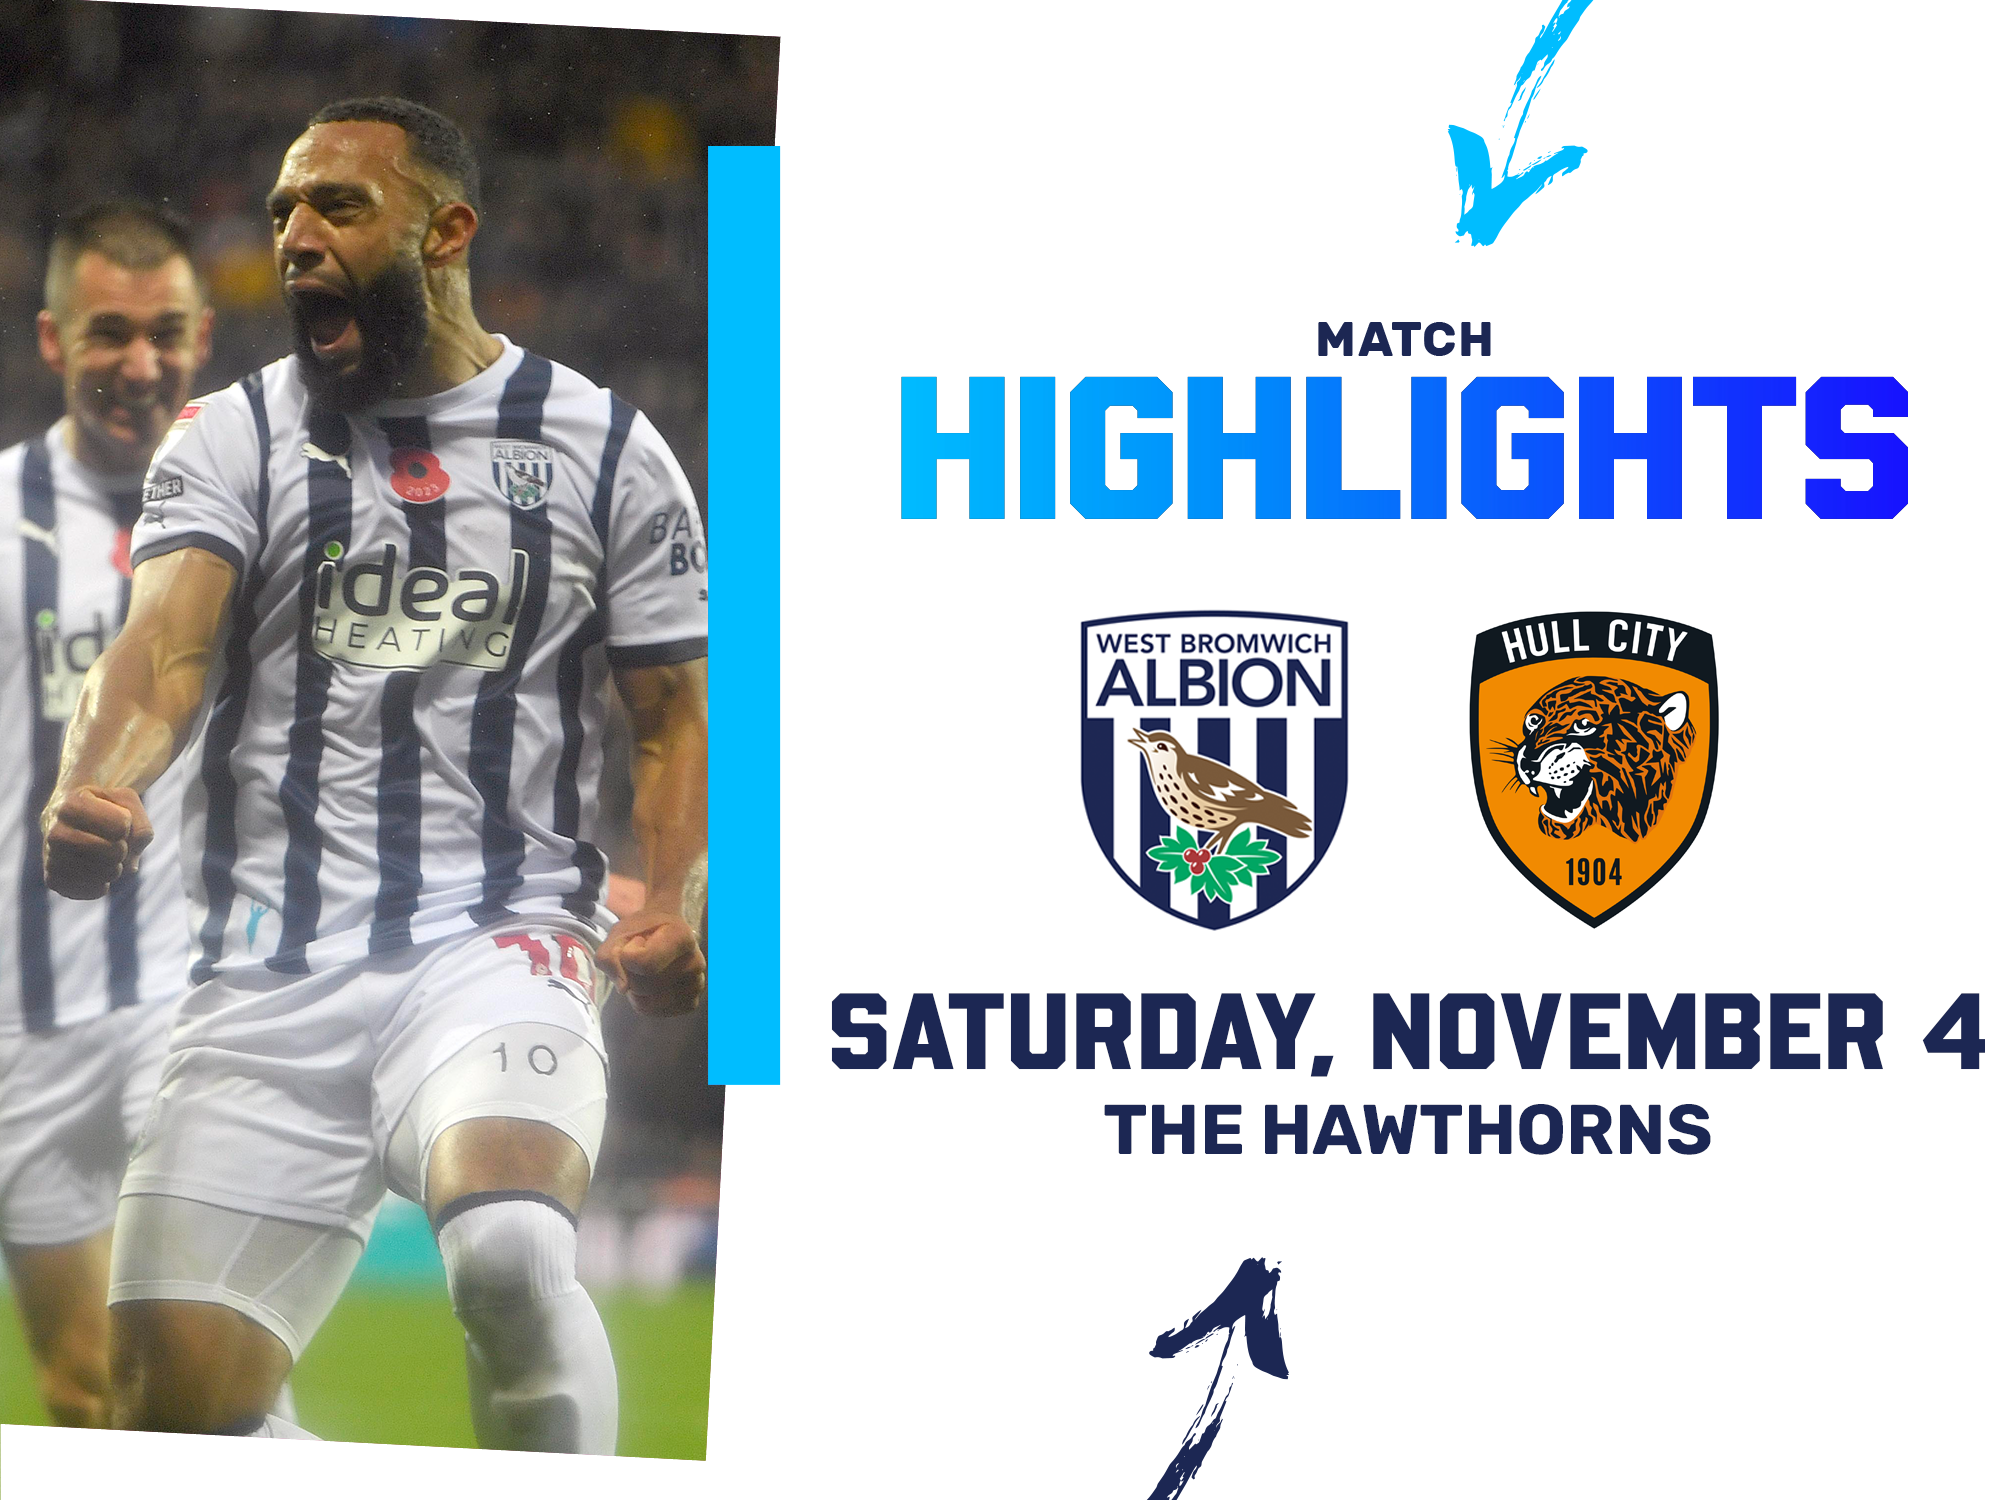 A photo graphic, entailing the club crests of Albion and Hull City - showing Matt Phillips celebrating in the 2023/24 home kit which leads to highlights from the Baggies' win over Hull